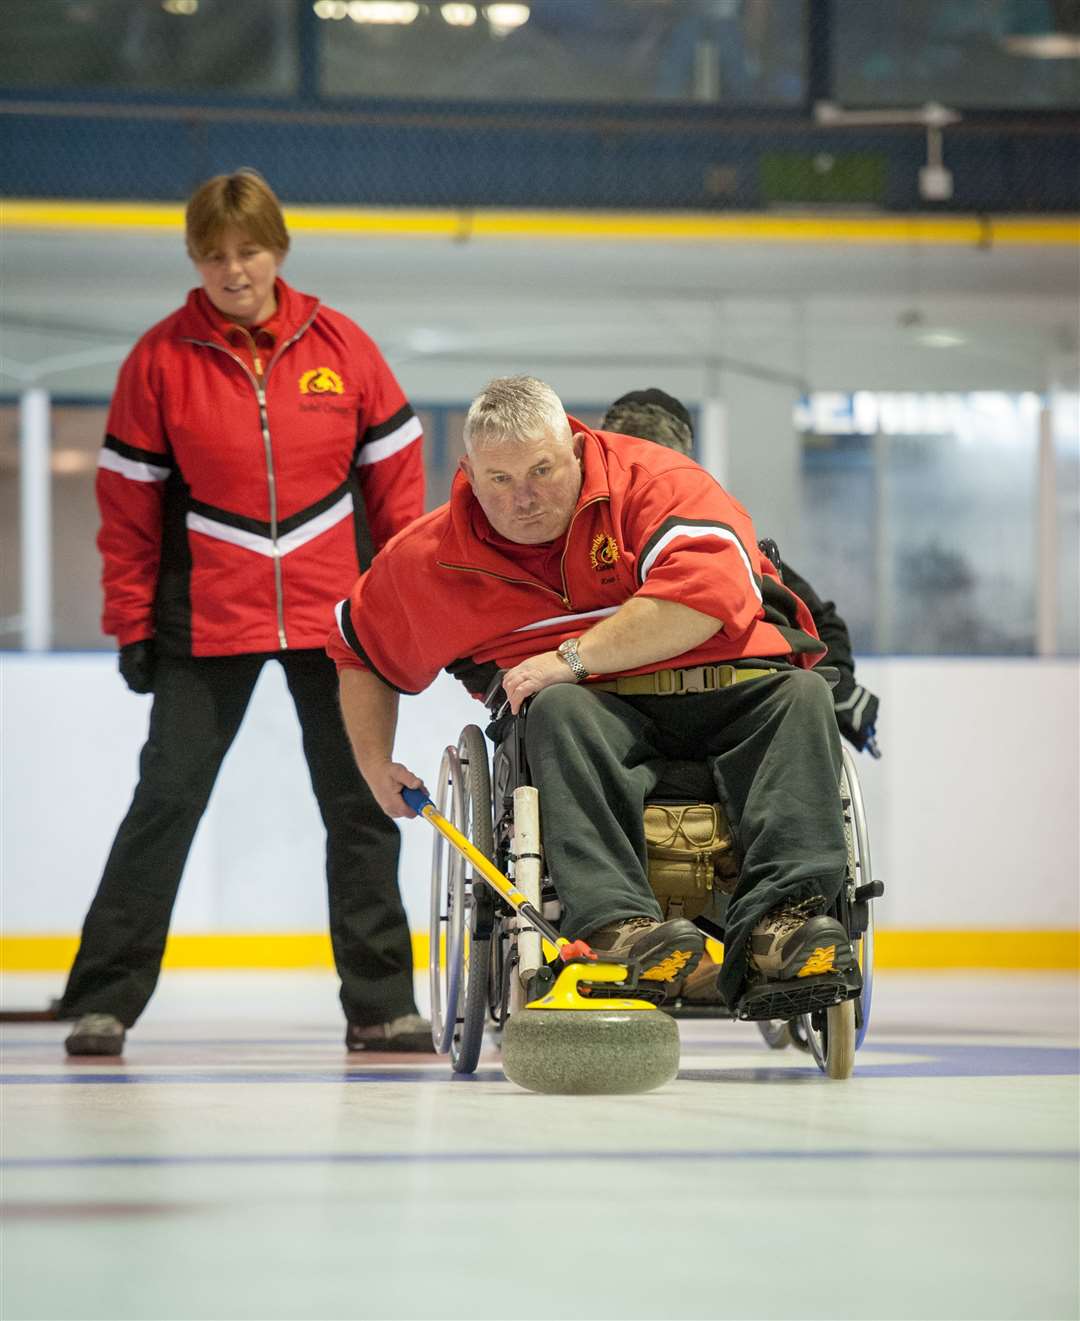 Highland Wheelchair Curling Triples is now in its eighth year in Inverness.